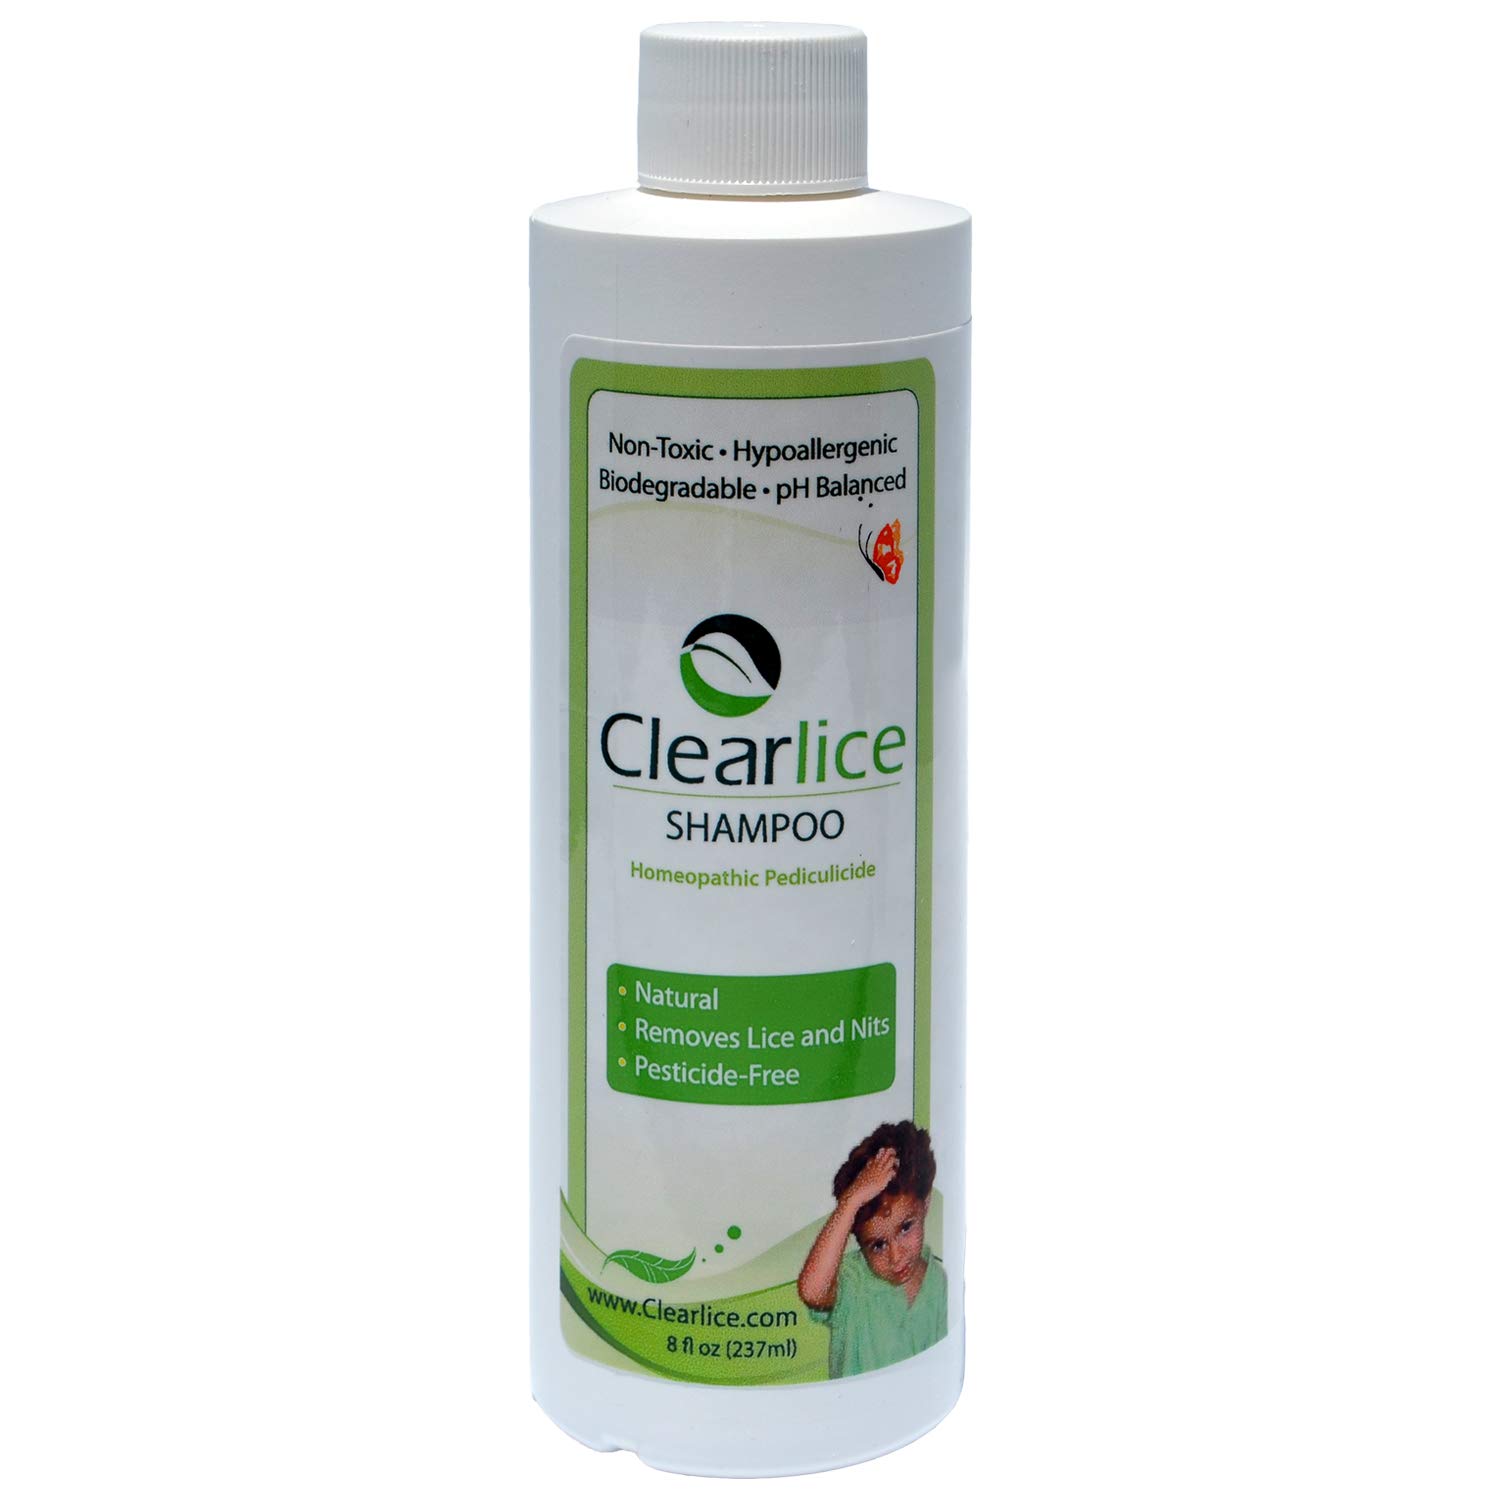 ClearLice Head Lice Treatment Shampoo - Natural and Effective One Day Treatment